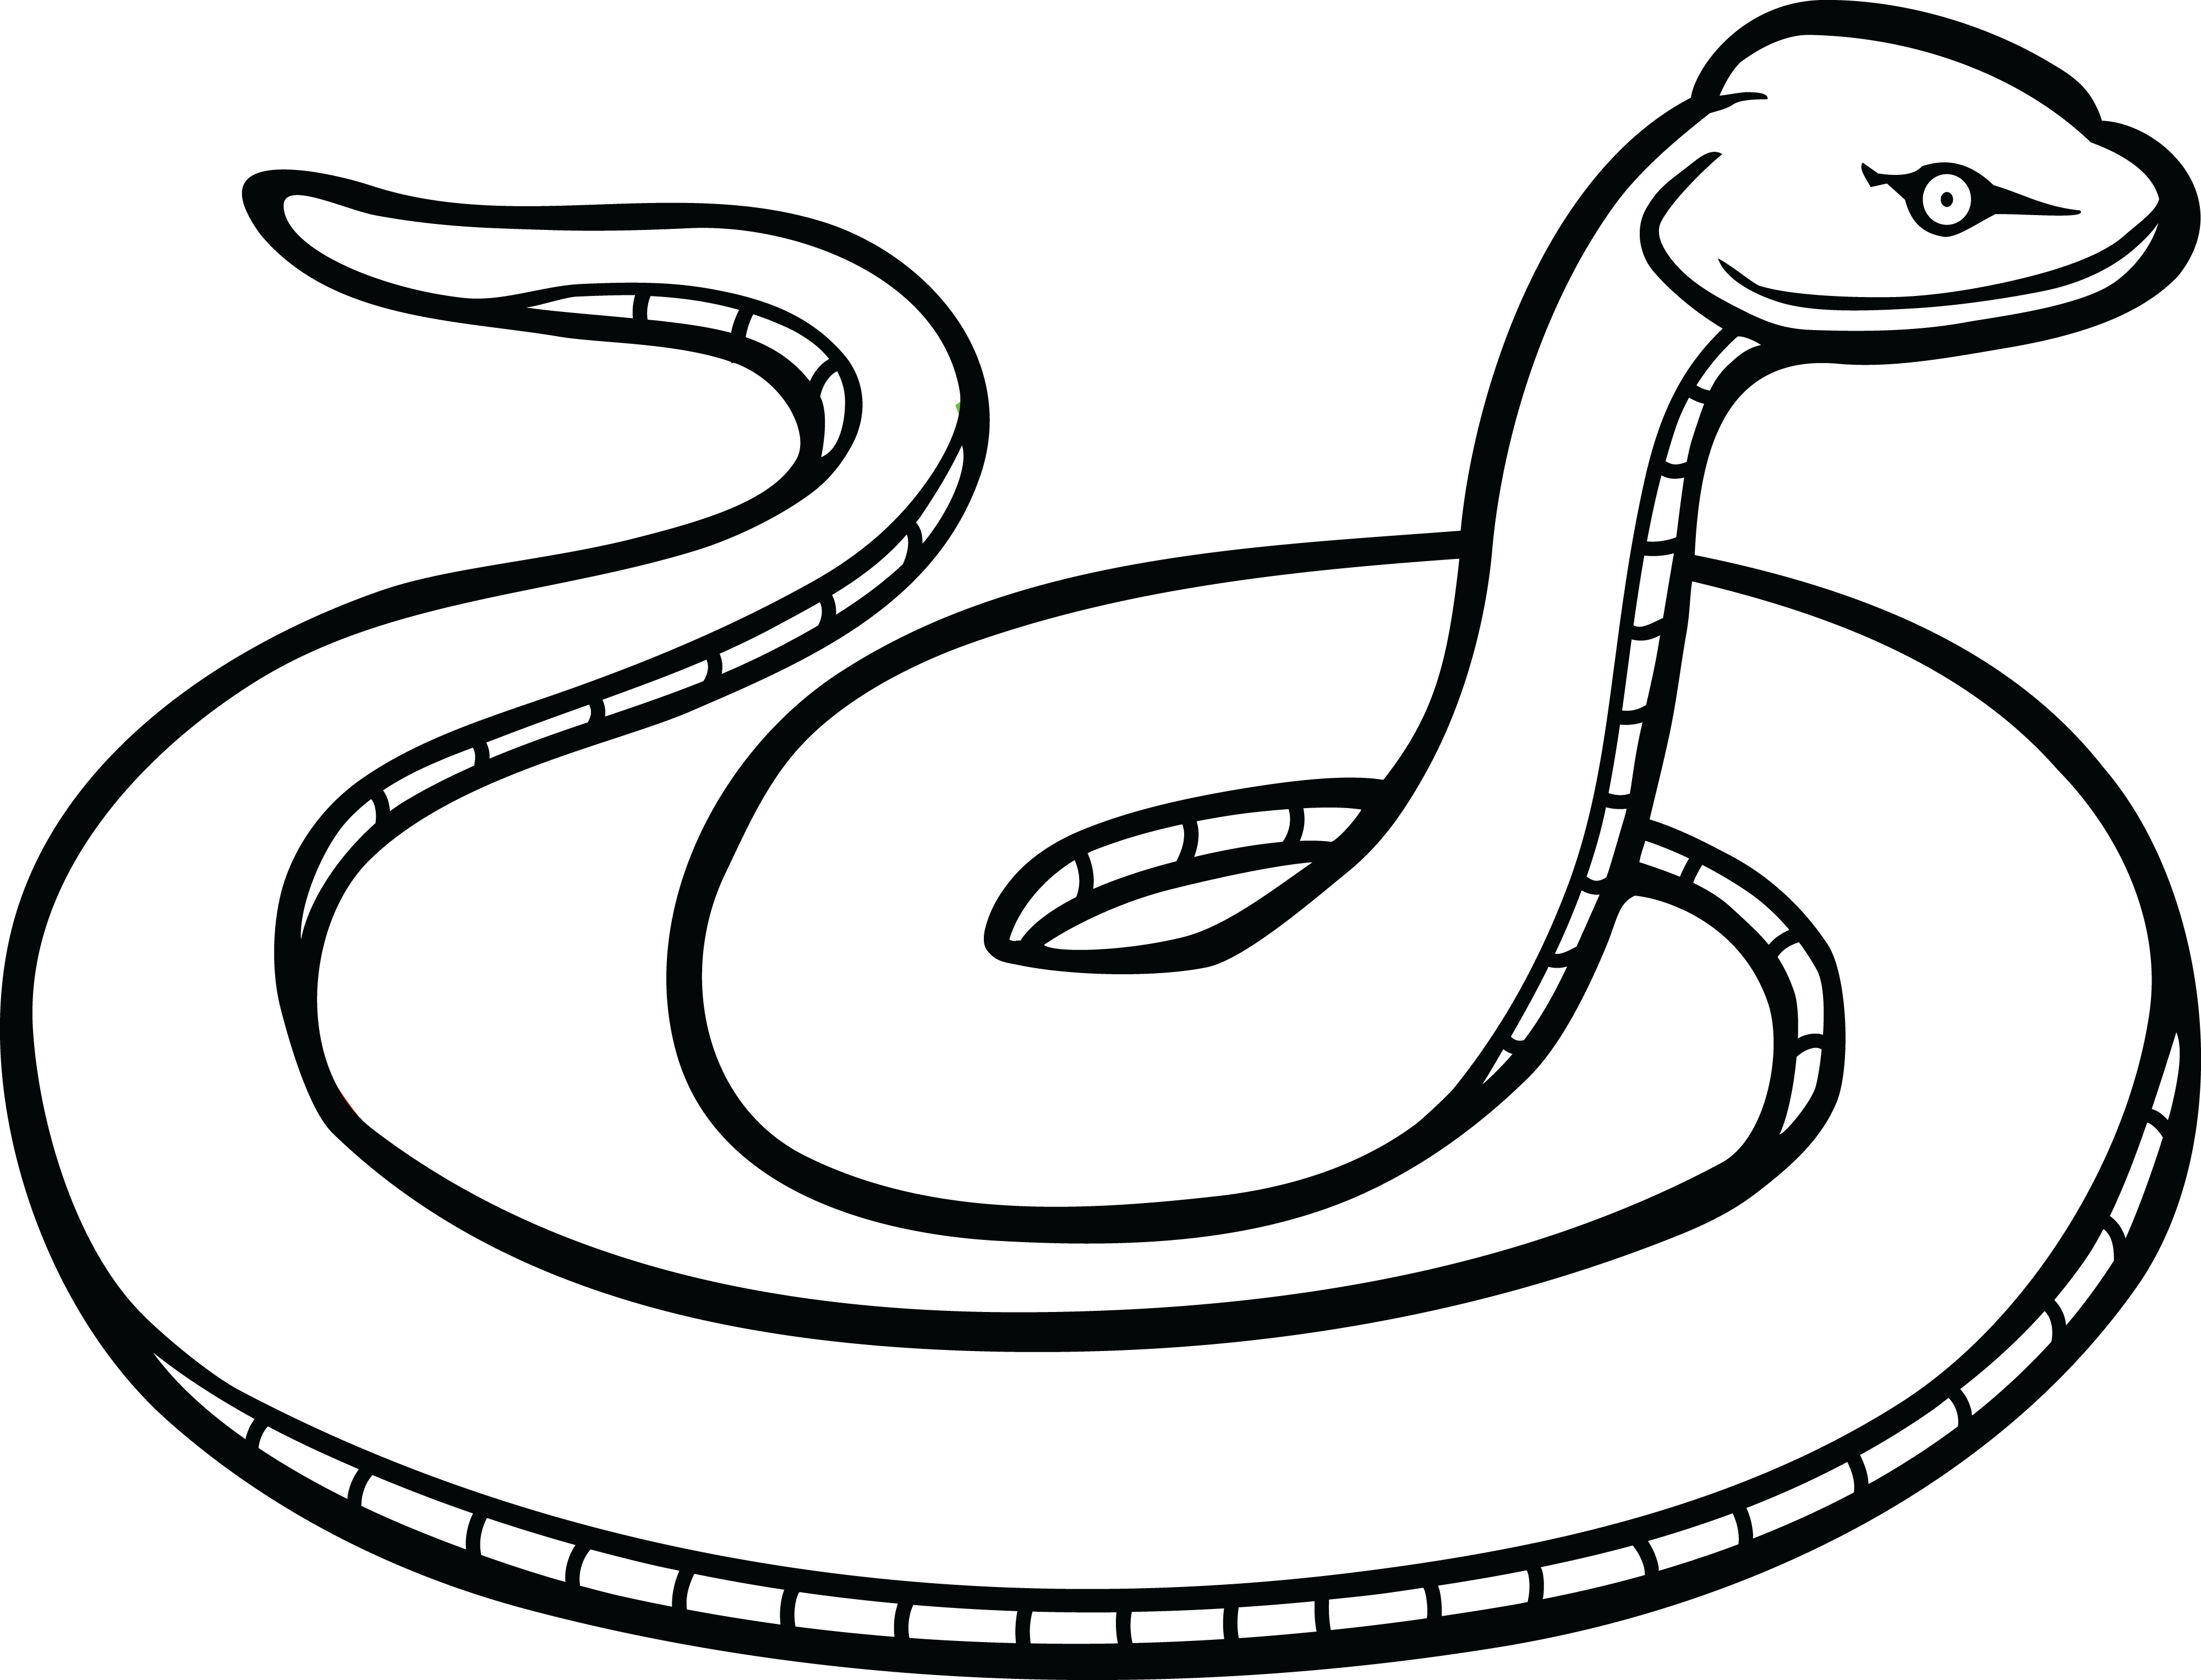 Coiled Snake PNG HD - 129055